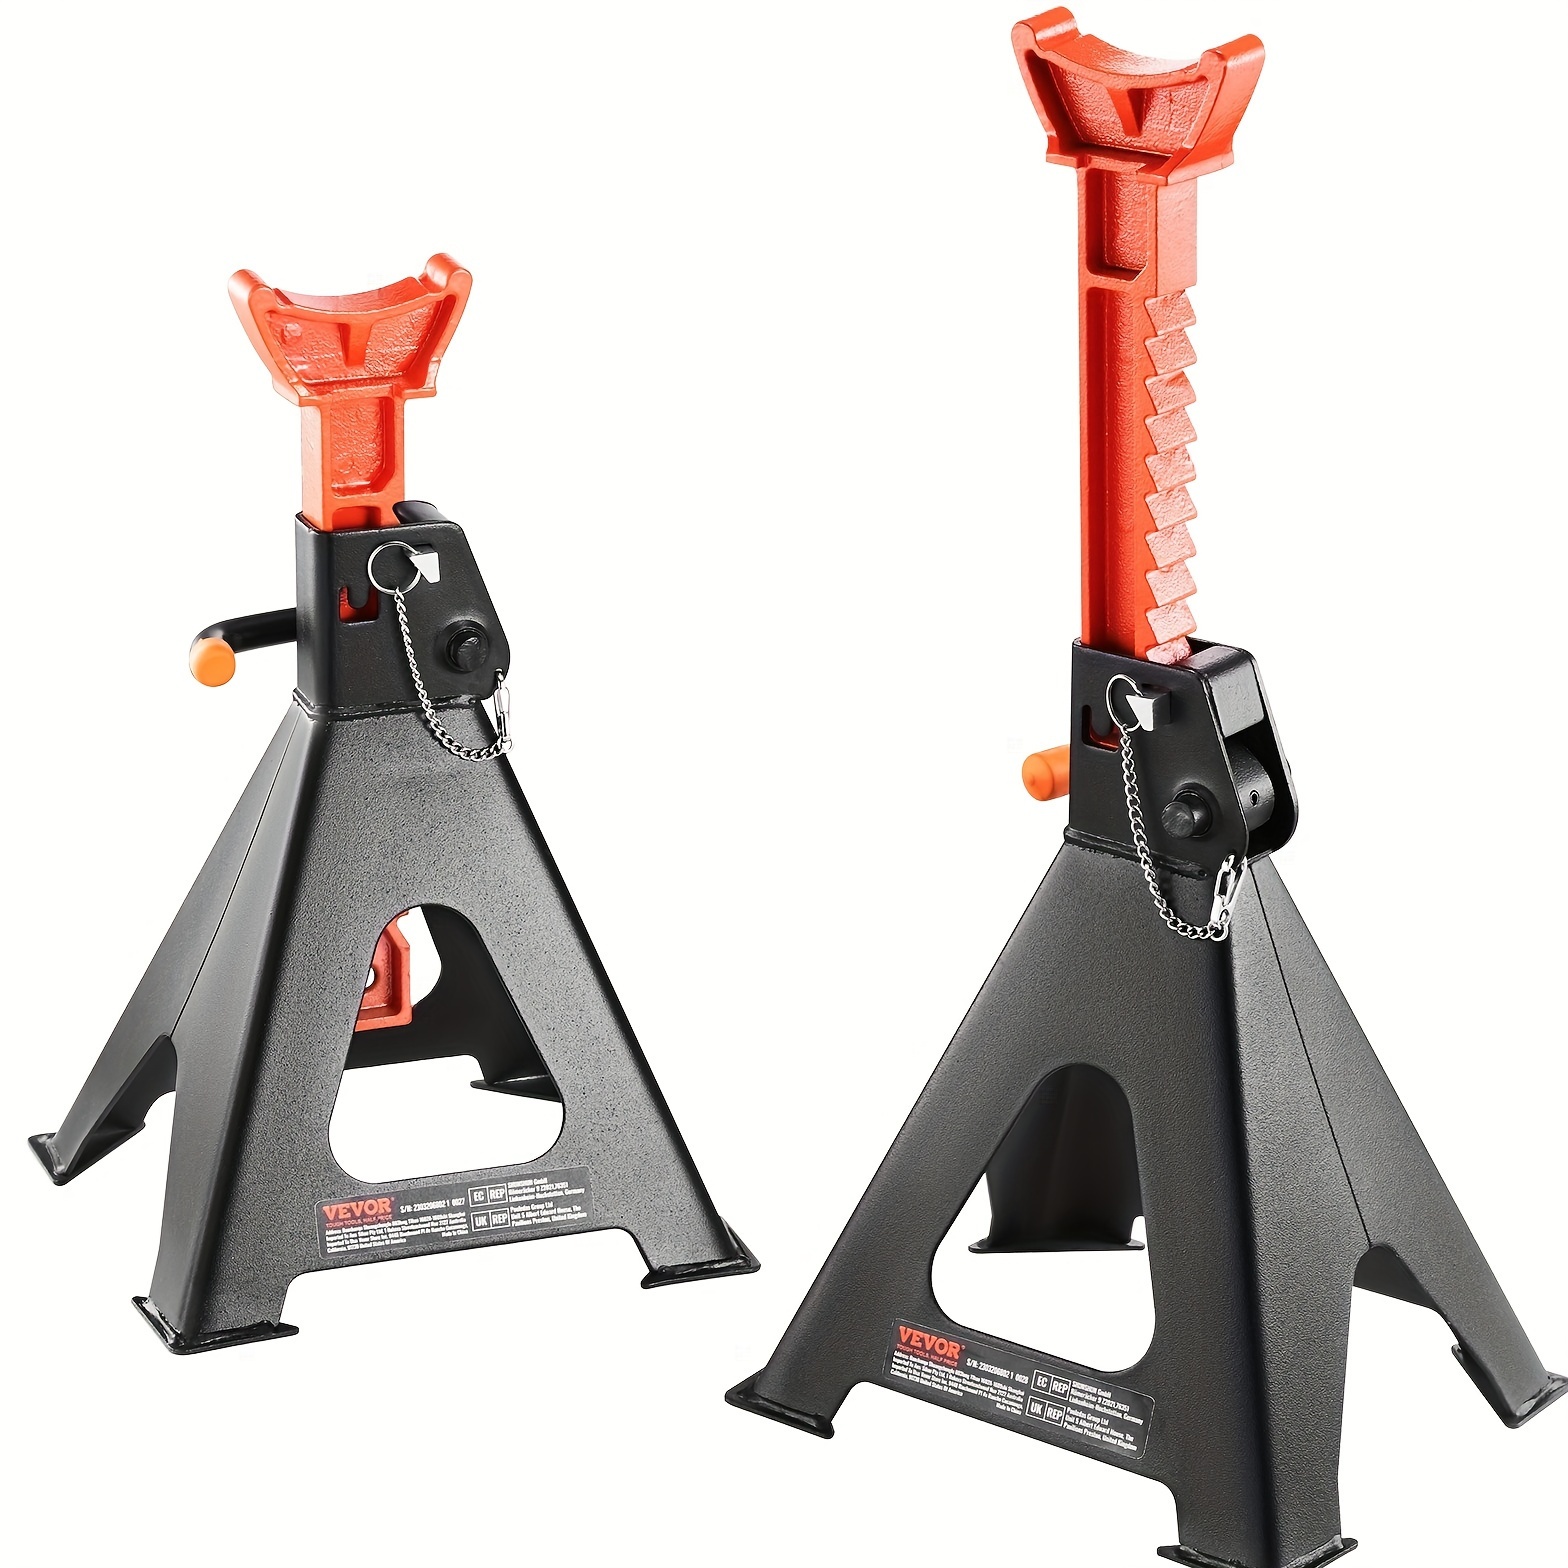 

Jack Stands 6 Ton (13 000 Lbs) Capacity Car Jack Stands Double Locking 14 2 23 Inch Adjustable Height For Lifting Suv Pickup Truck Car And Utv Atv Red 1 Pair